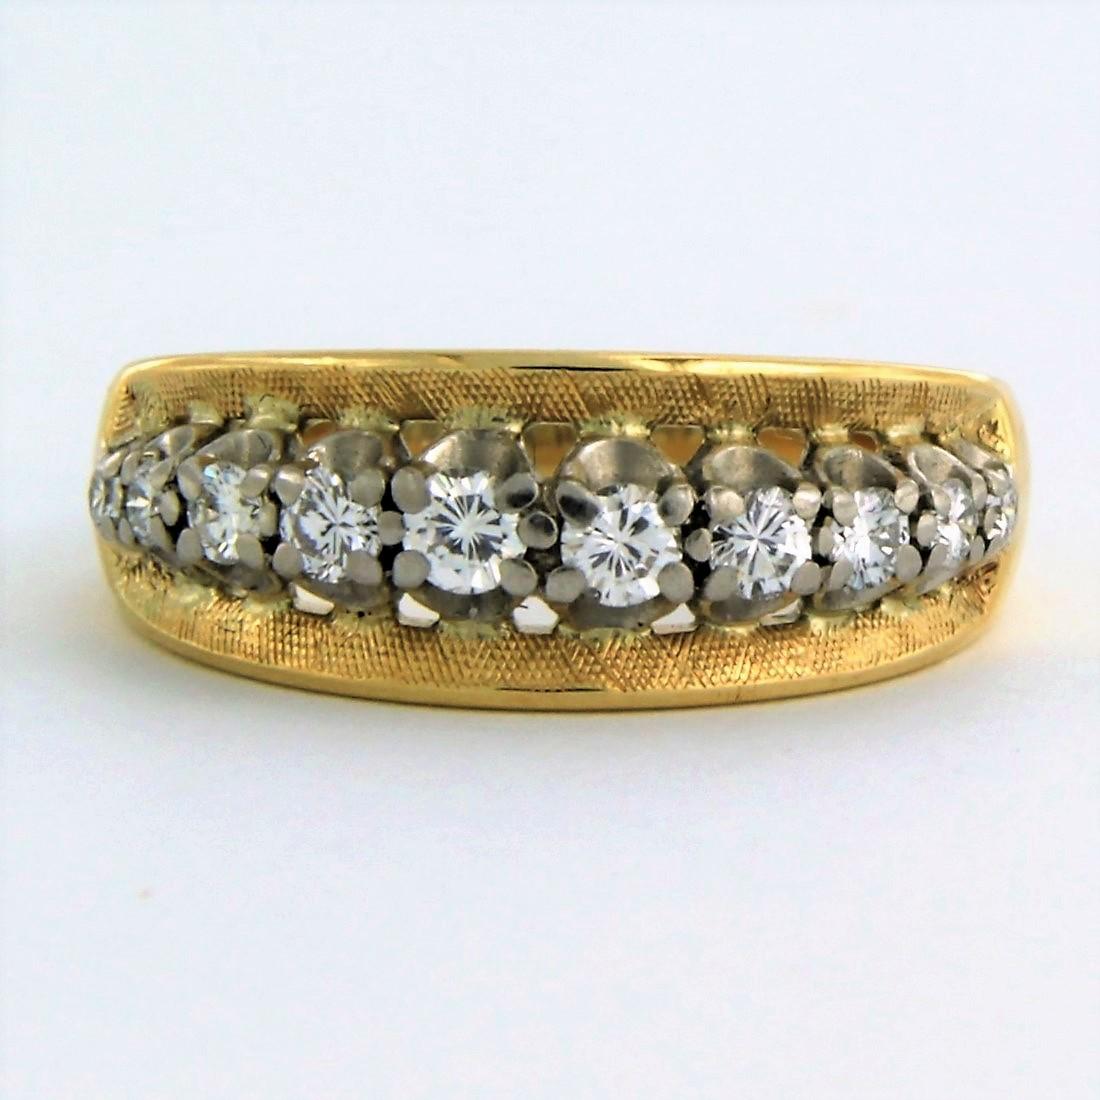 18k bicolour gold ring set with brilliant cut diamonds up to . 0.30ct - F/G - VS/SI - ring size U.S. 4.75 - EU. 15.5 (49)

detailed description:

the ring is approximately 7.1 mm wide

ring size US 4.75 - EU. 15.5 (49), ring can be enlarged or